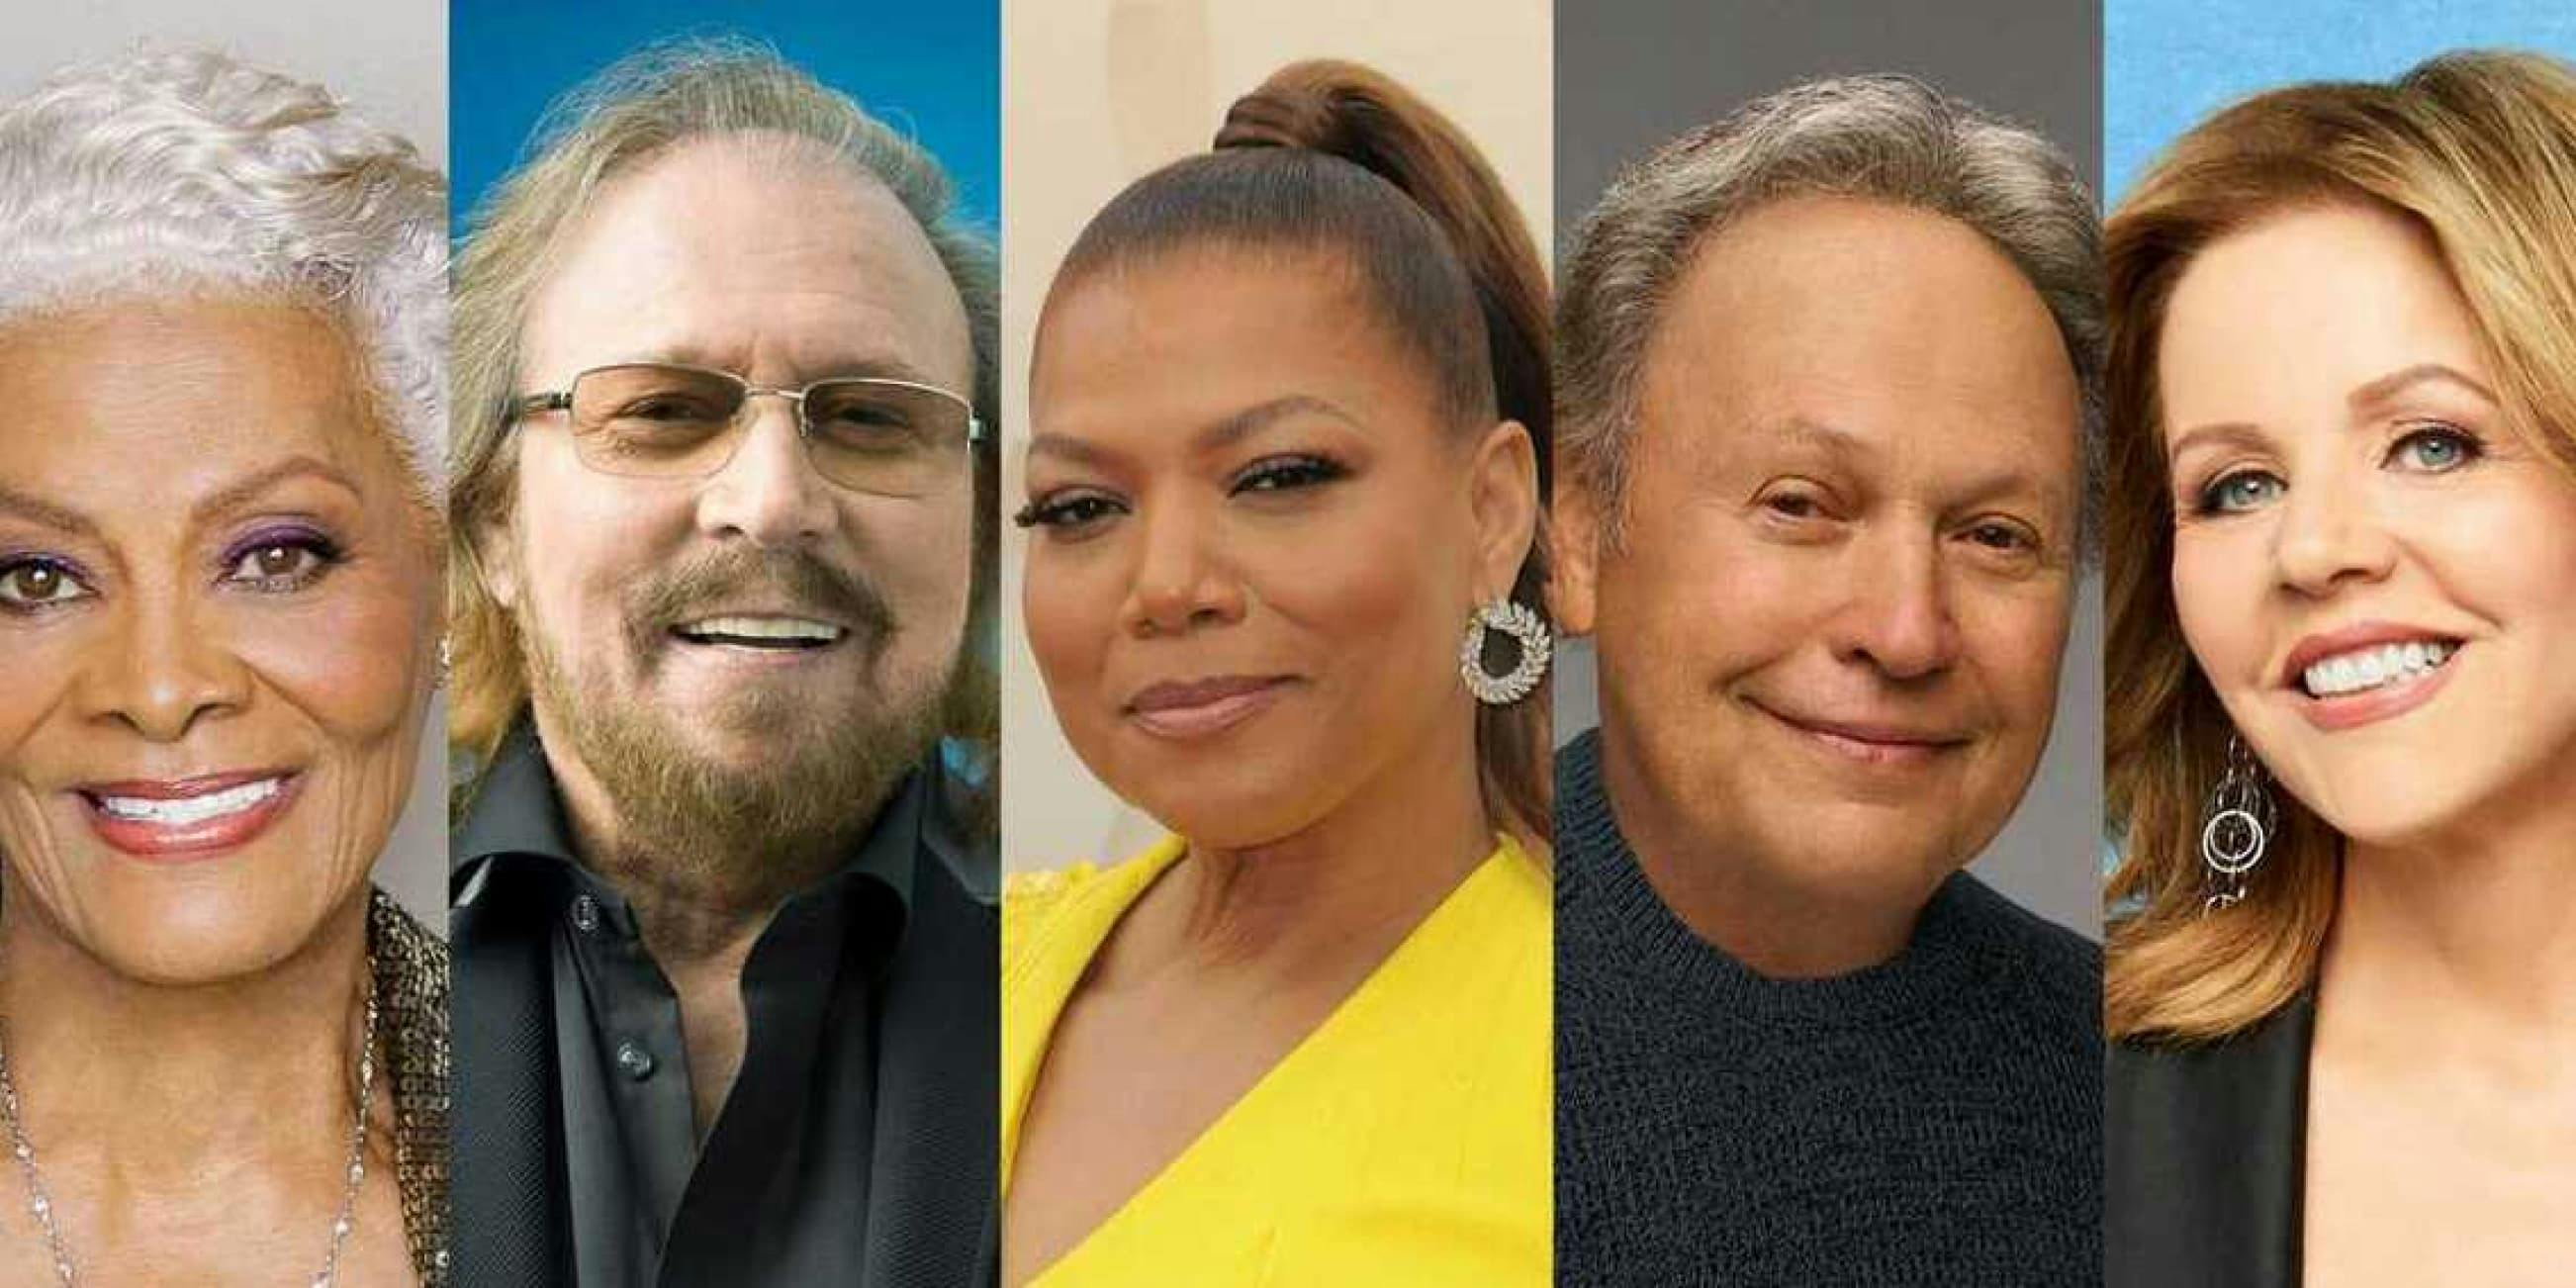 Honorees for the 46th Kennedy Center Honors